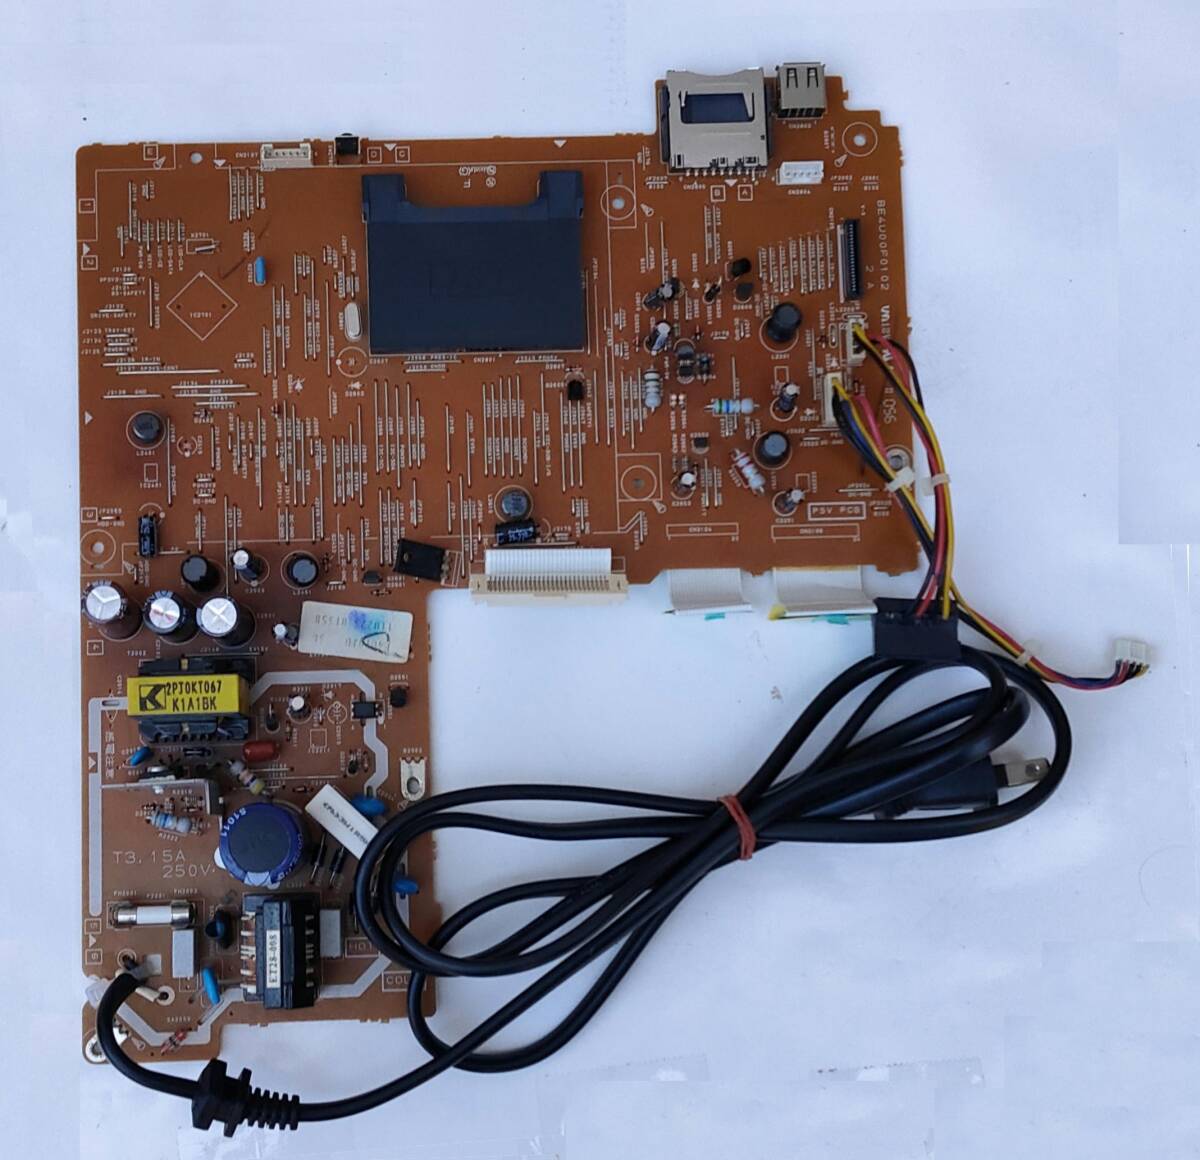  Toshiba Blue-ray recorder D-BZ500 for power supply basis board..[ operation goods ]